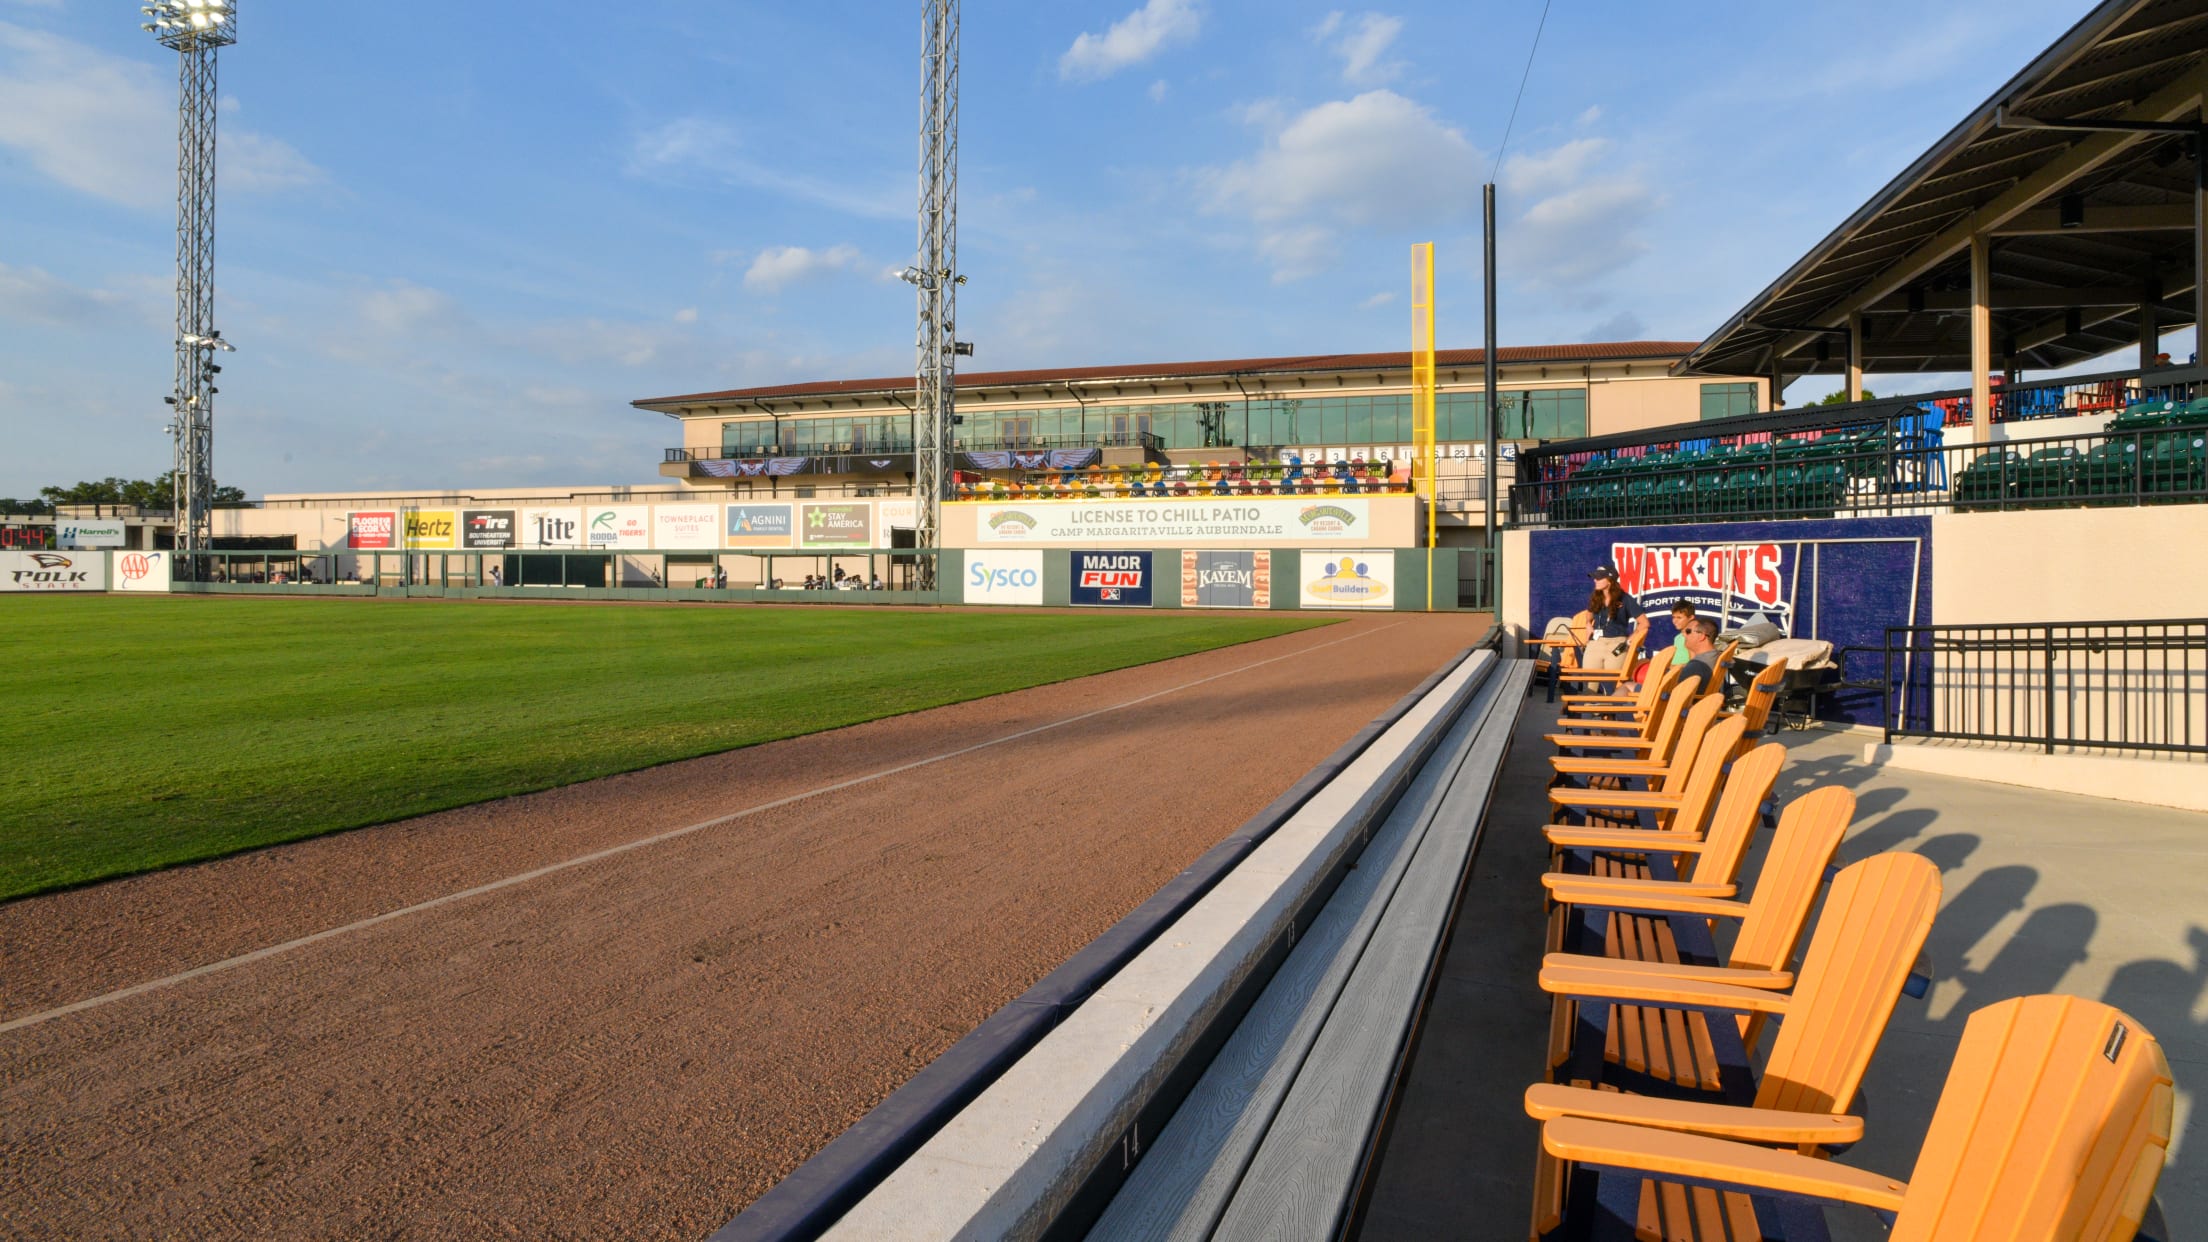 Lakeland's 'historic but modern' spring training home of the Detroit Tigers